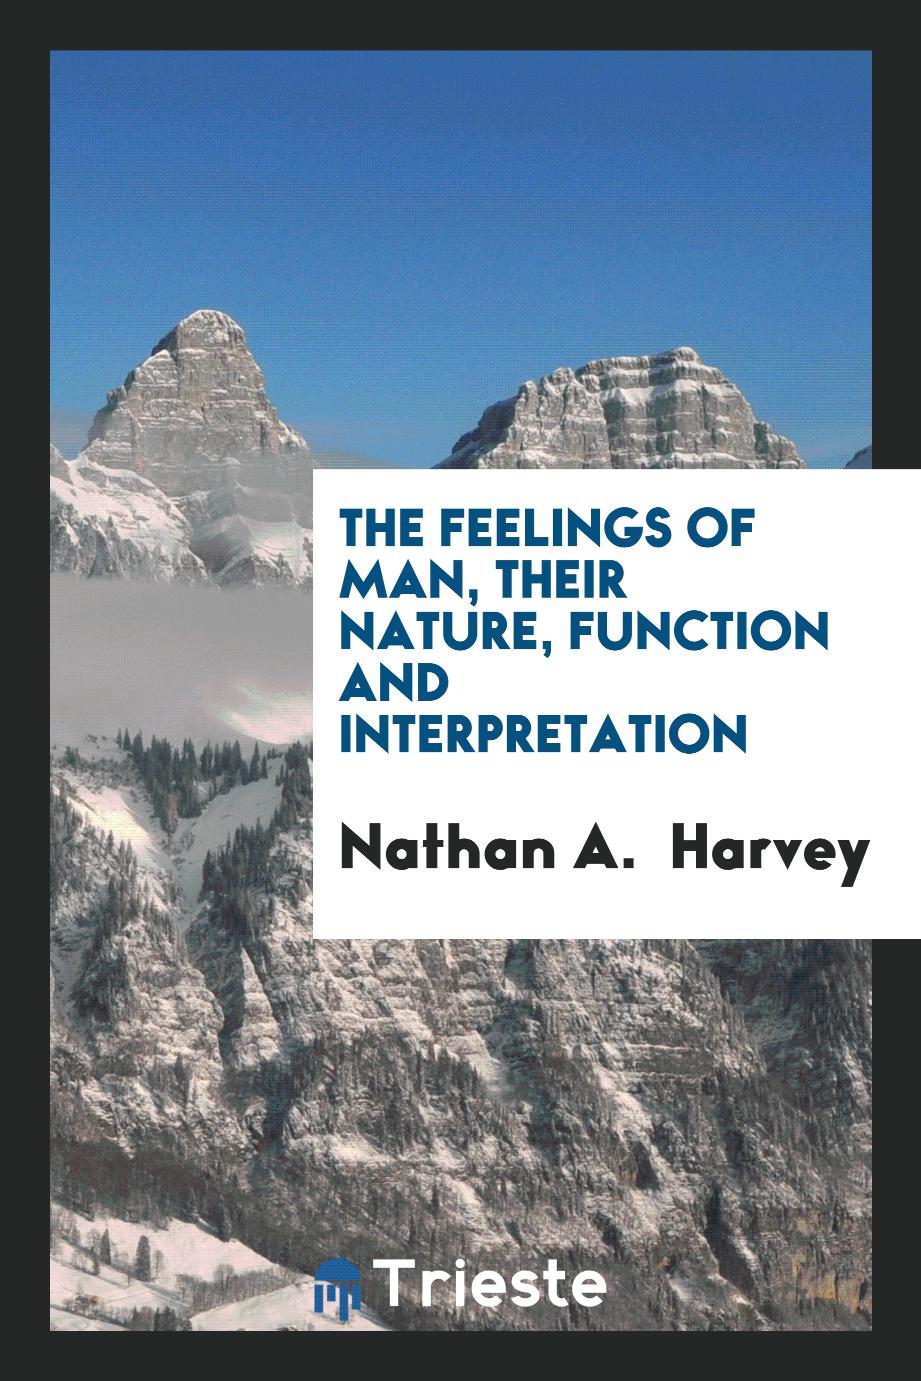 The feelings of man, their nature, function and interpretation